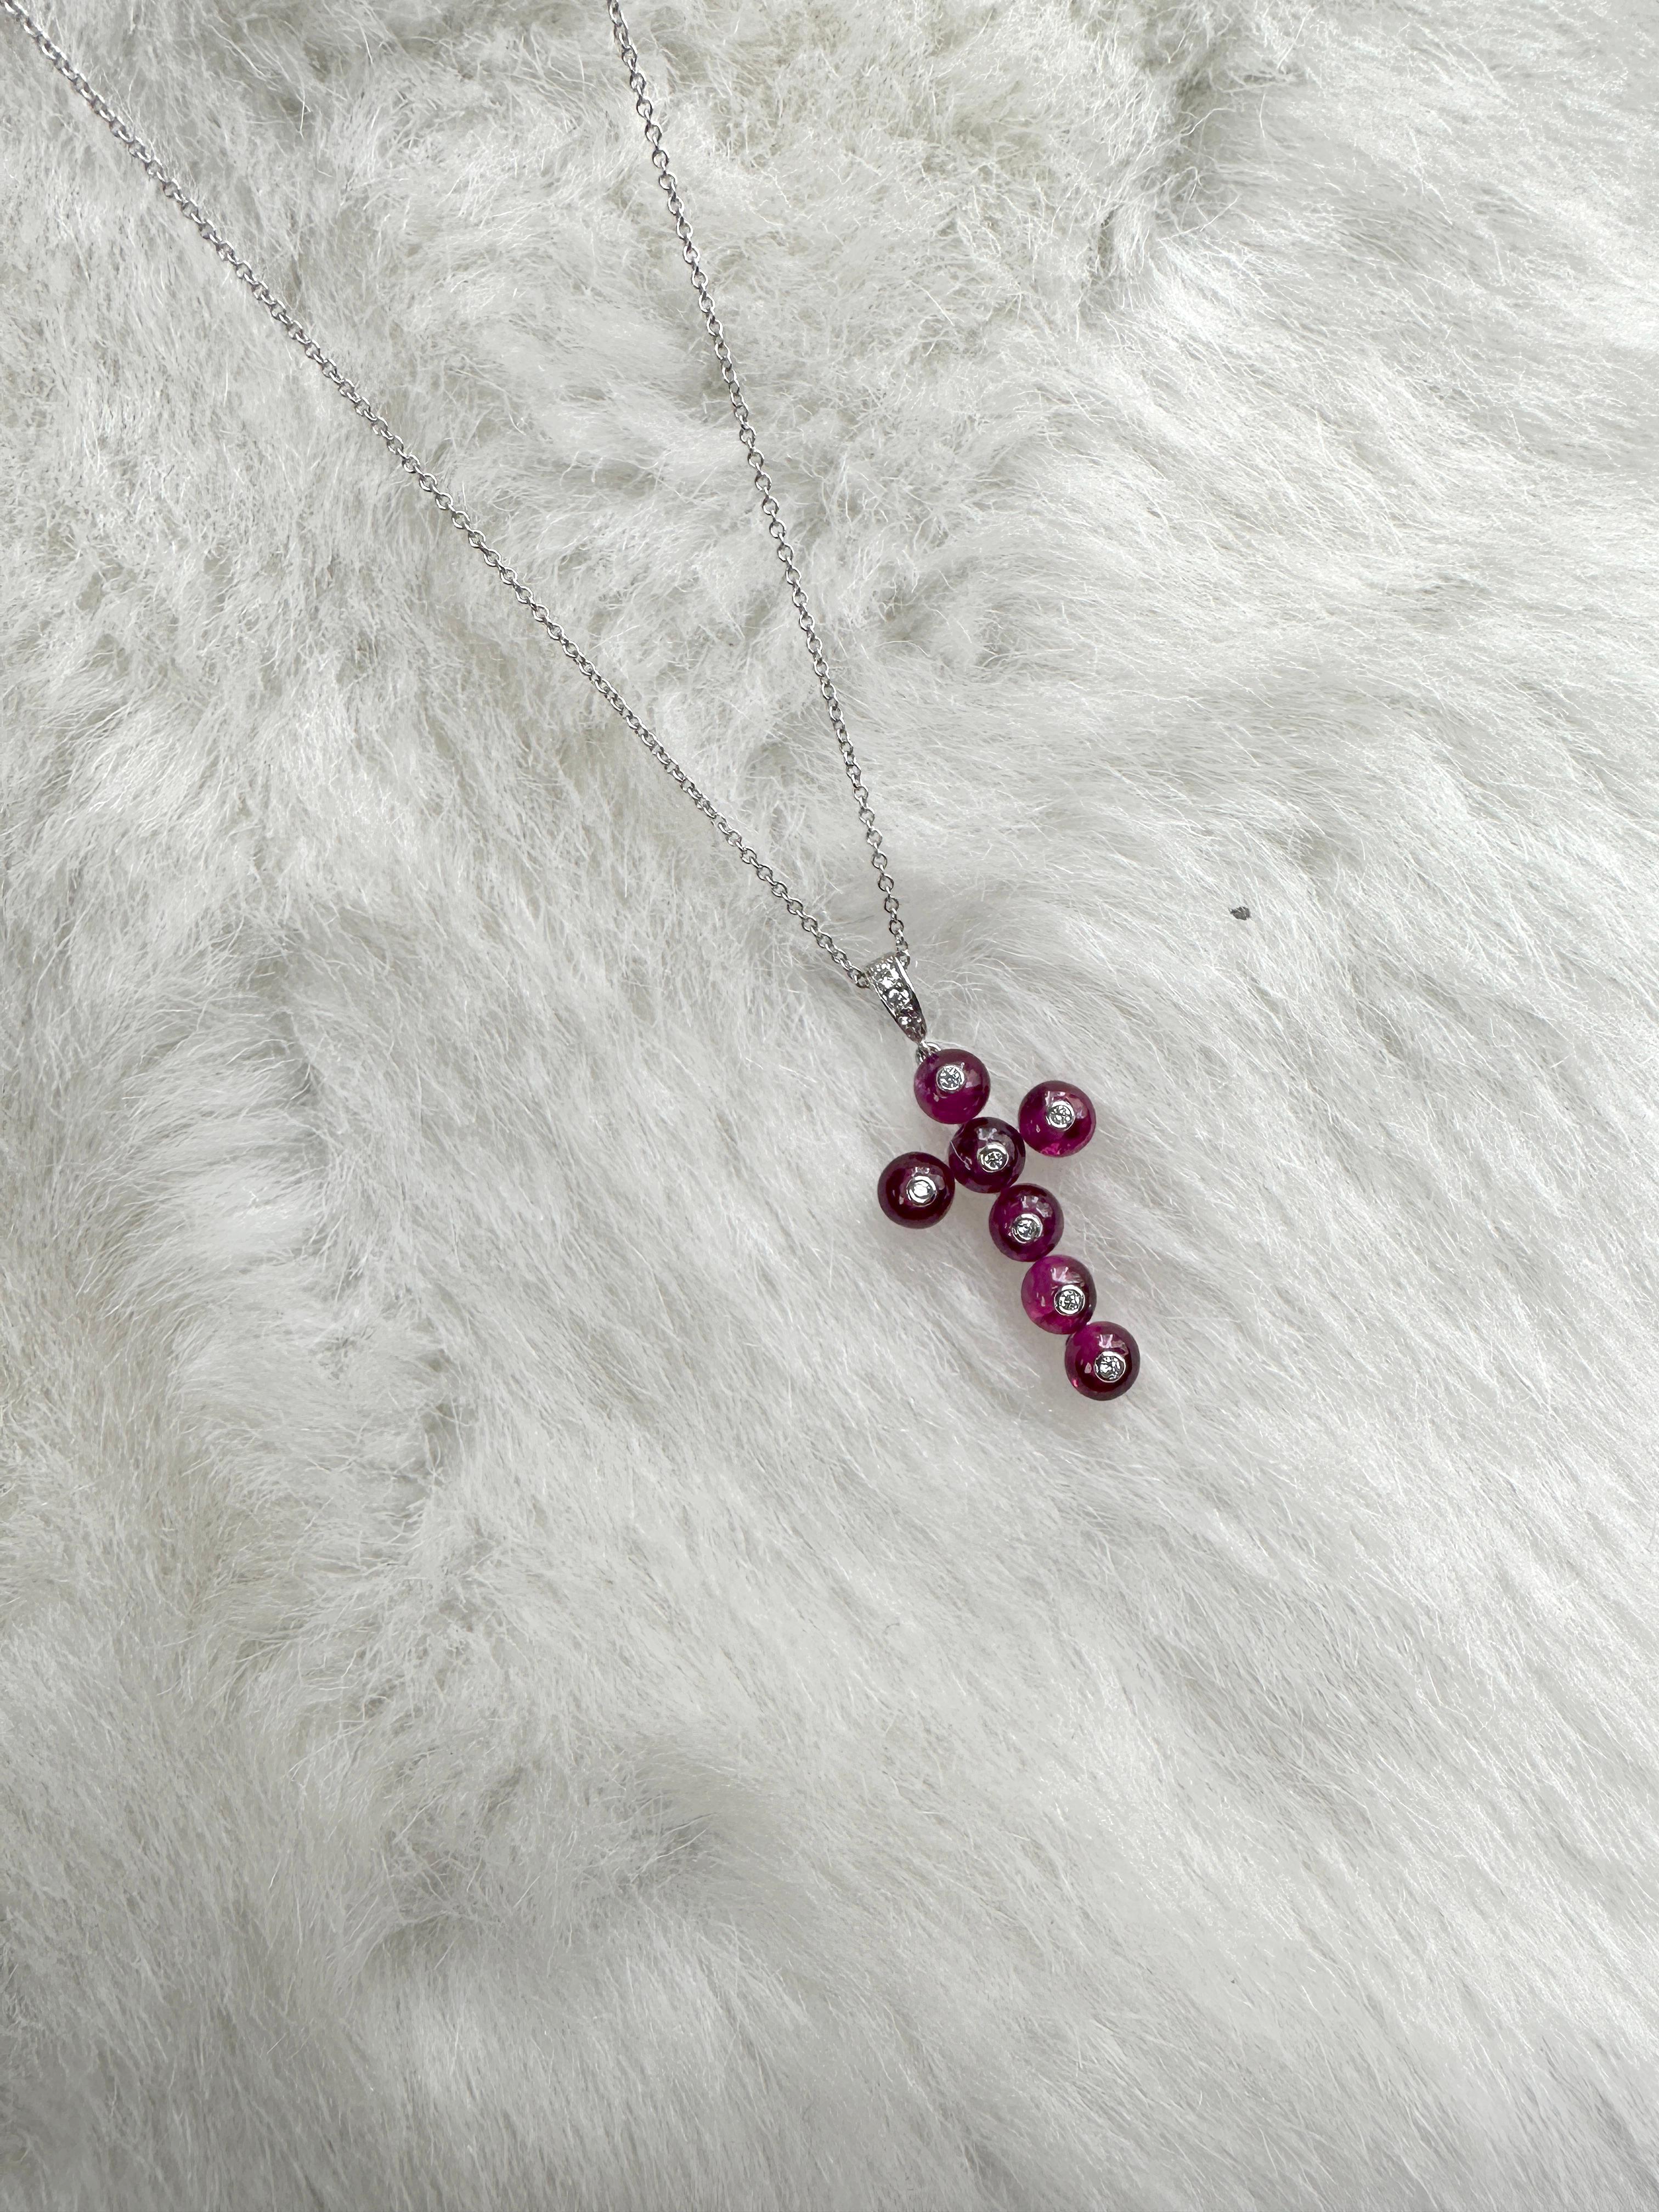 The 7 Stone Ruby Bead with Diamonds Pendant in Platinum with 18K White Gold Chain is a stunning piece of jewelry from the 'G-One' Collection. The pendant features seven exquisite rubies in a bead style, surrounded by shimmering diamonds, set in